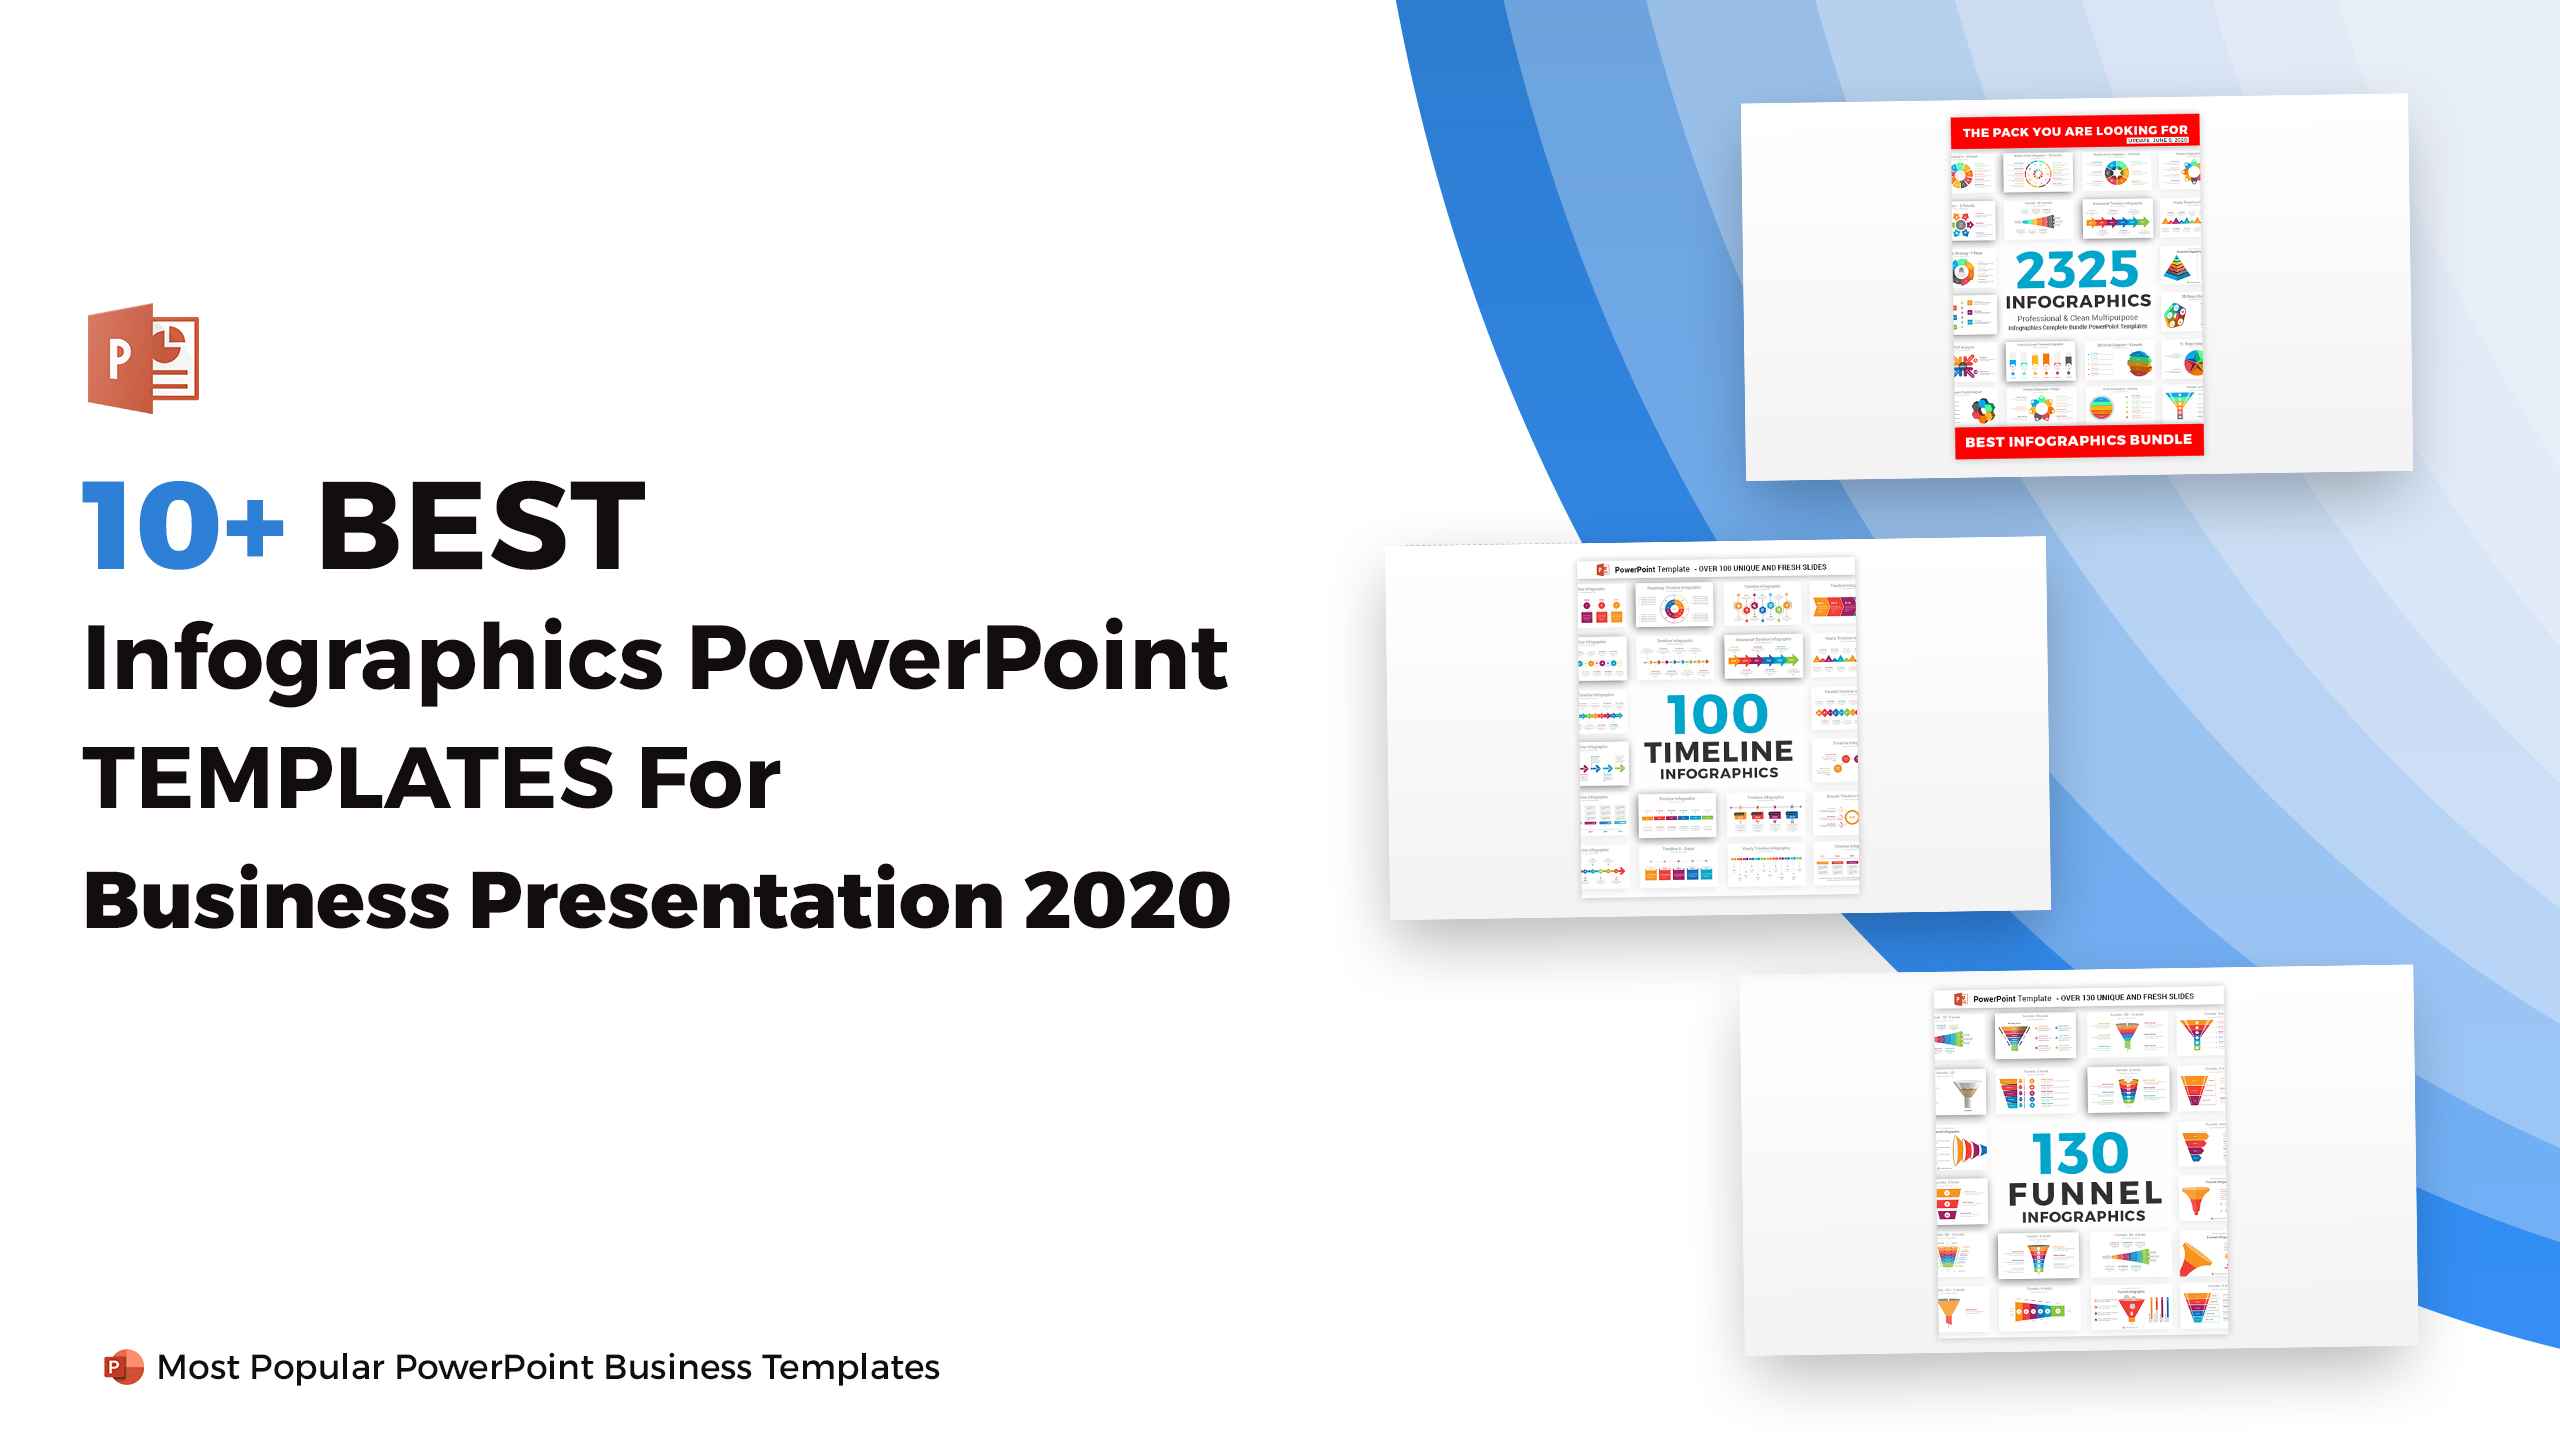 10+ Best Infographics PowerPoint Templates for Business Presentation 2020